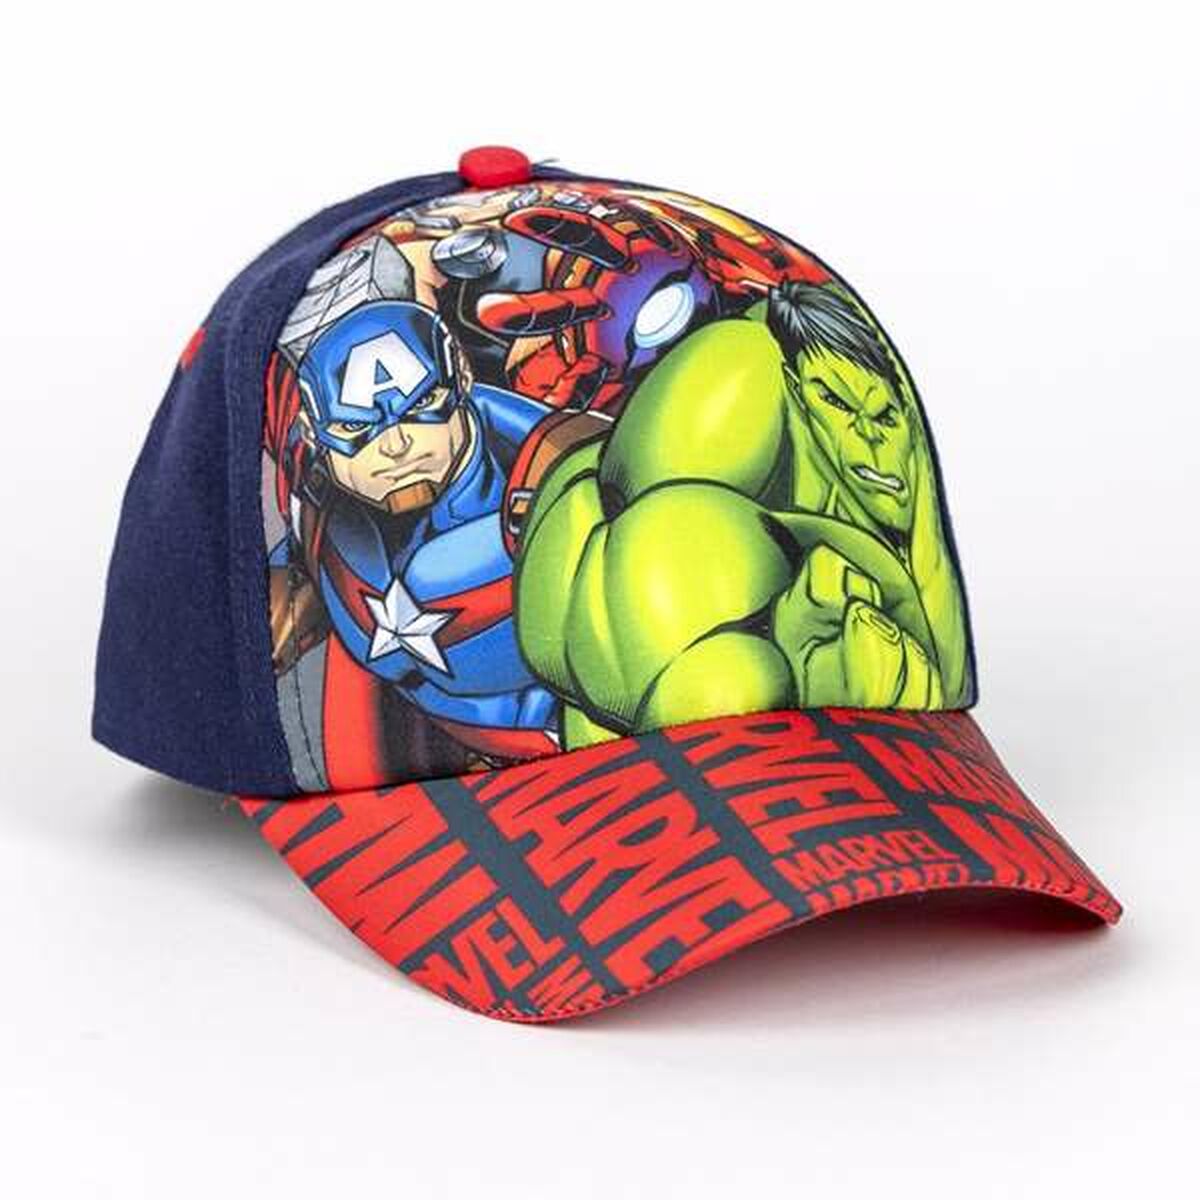 Set of cap and sunglasses The Avengers 2 Pieces Children's